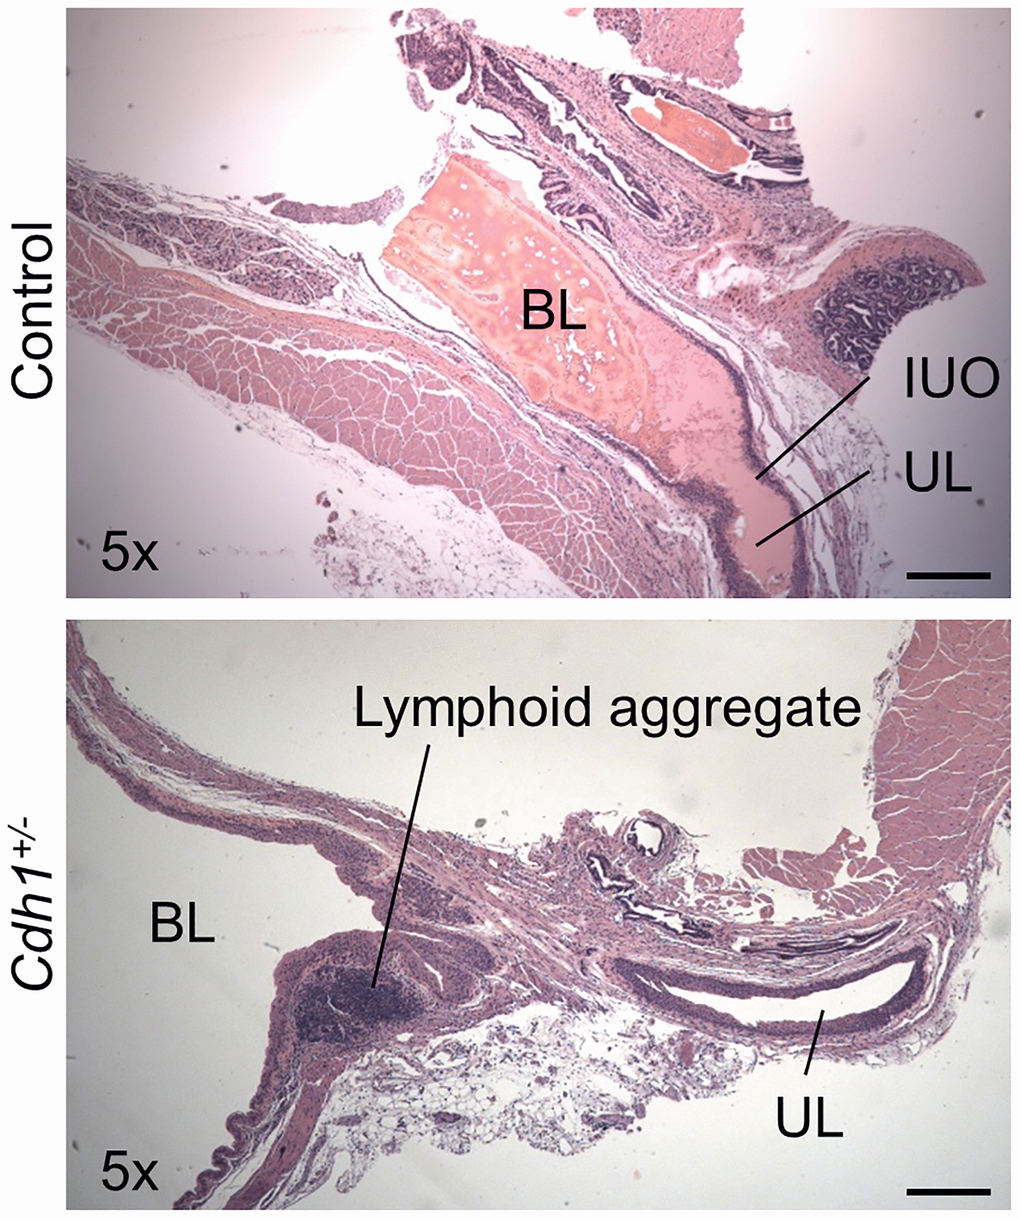 Impact of prostate-specific E-cadherin deficiency on bladder histology in mice analyzed at 24 months of age. H&E staining of transverse sections of bladder and bladder neck from Control and Cdh1+/- mice at 24 months of age. Abbreviations: BL: bladder lumen; UL: urethra lumen; IUO: Internal urethral orifice. Lymphoid aggregates (shown in Cdh1+/- image) were observed in both control and Cdh1+/- mice. Original magnification, 5×, scale bars indicate 400 μm in 5×.